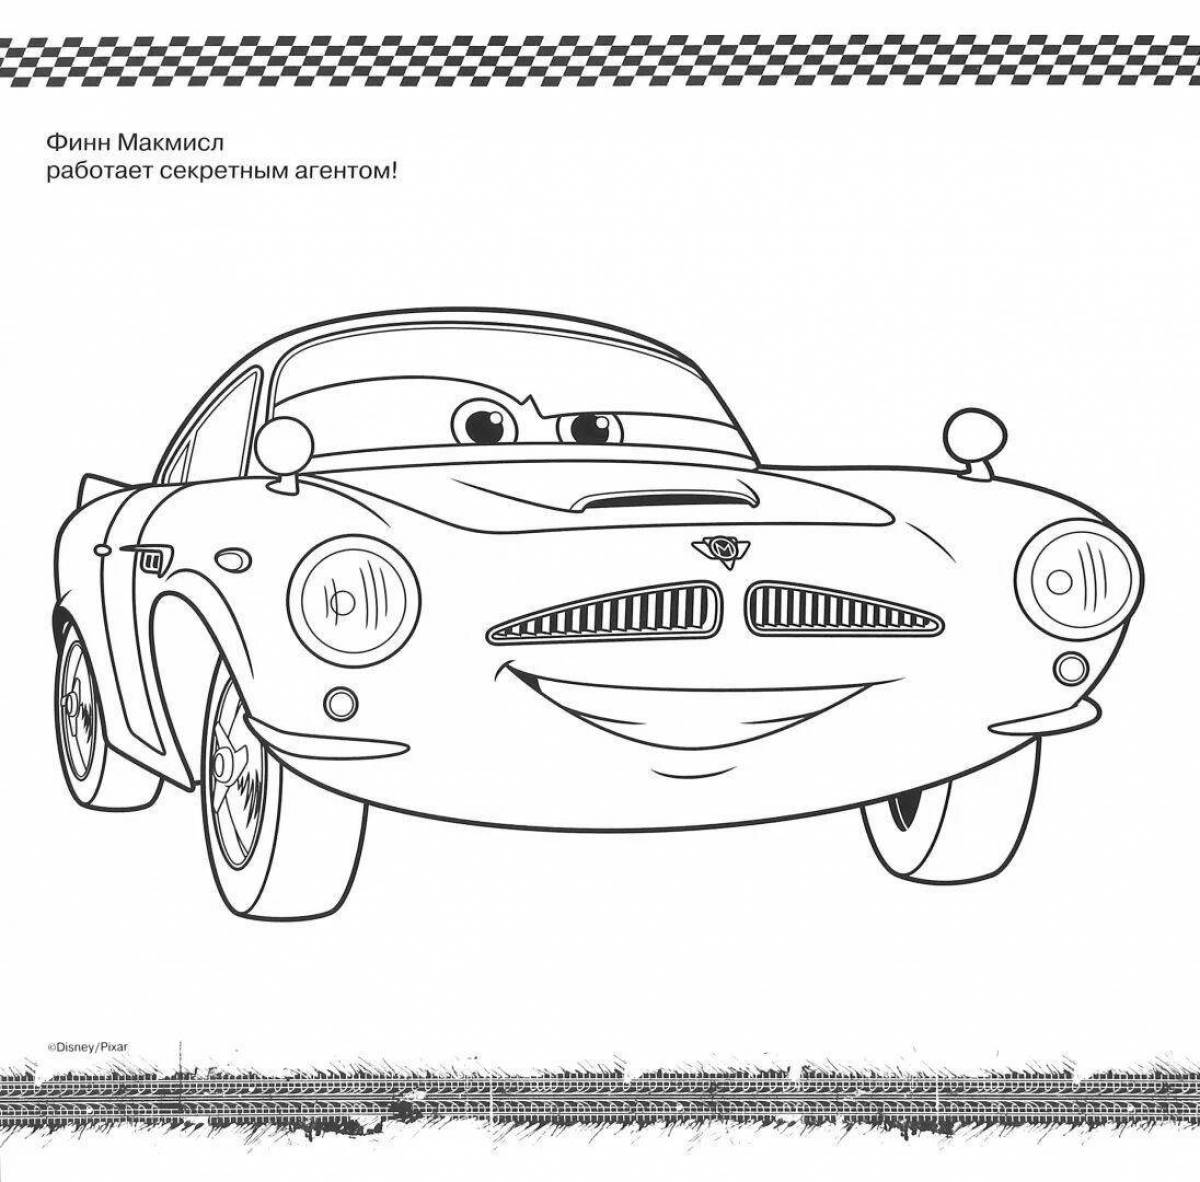 Amazing Cars 2 coloring book